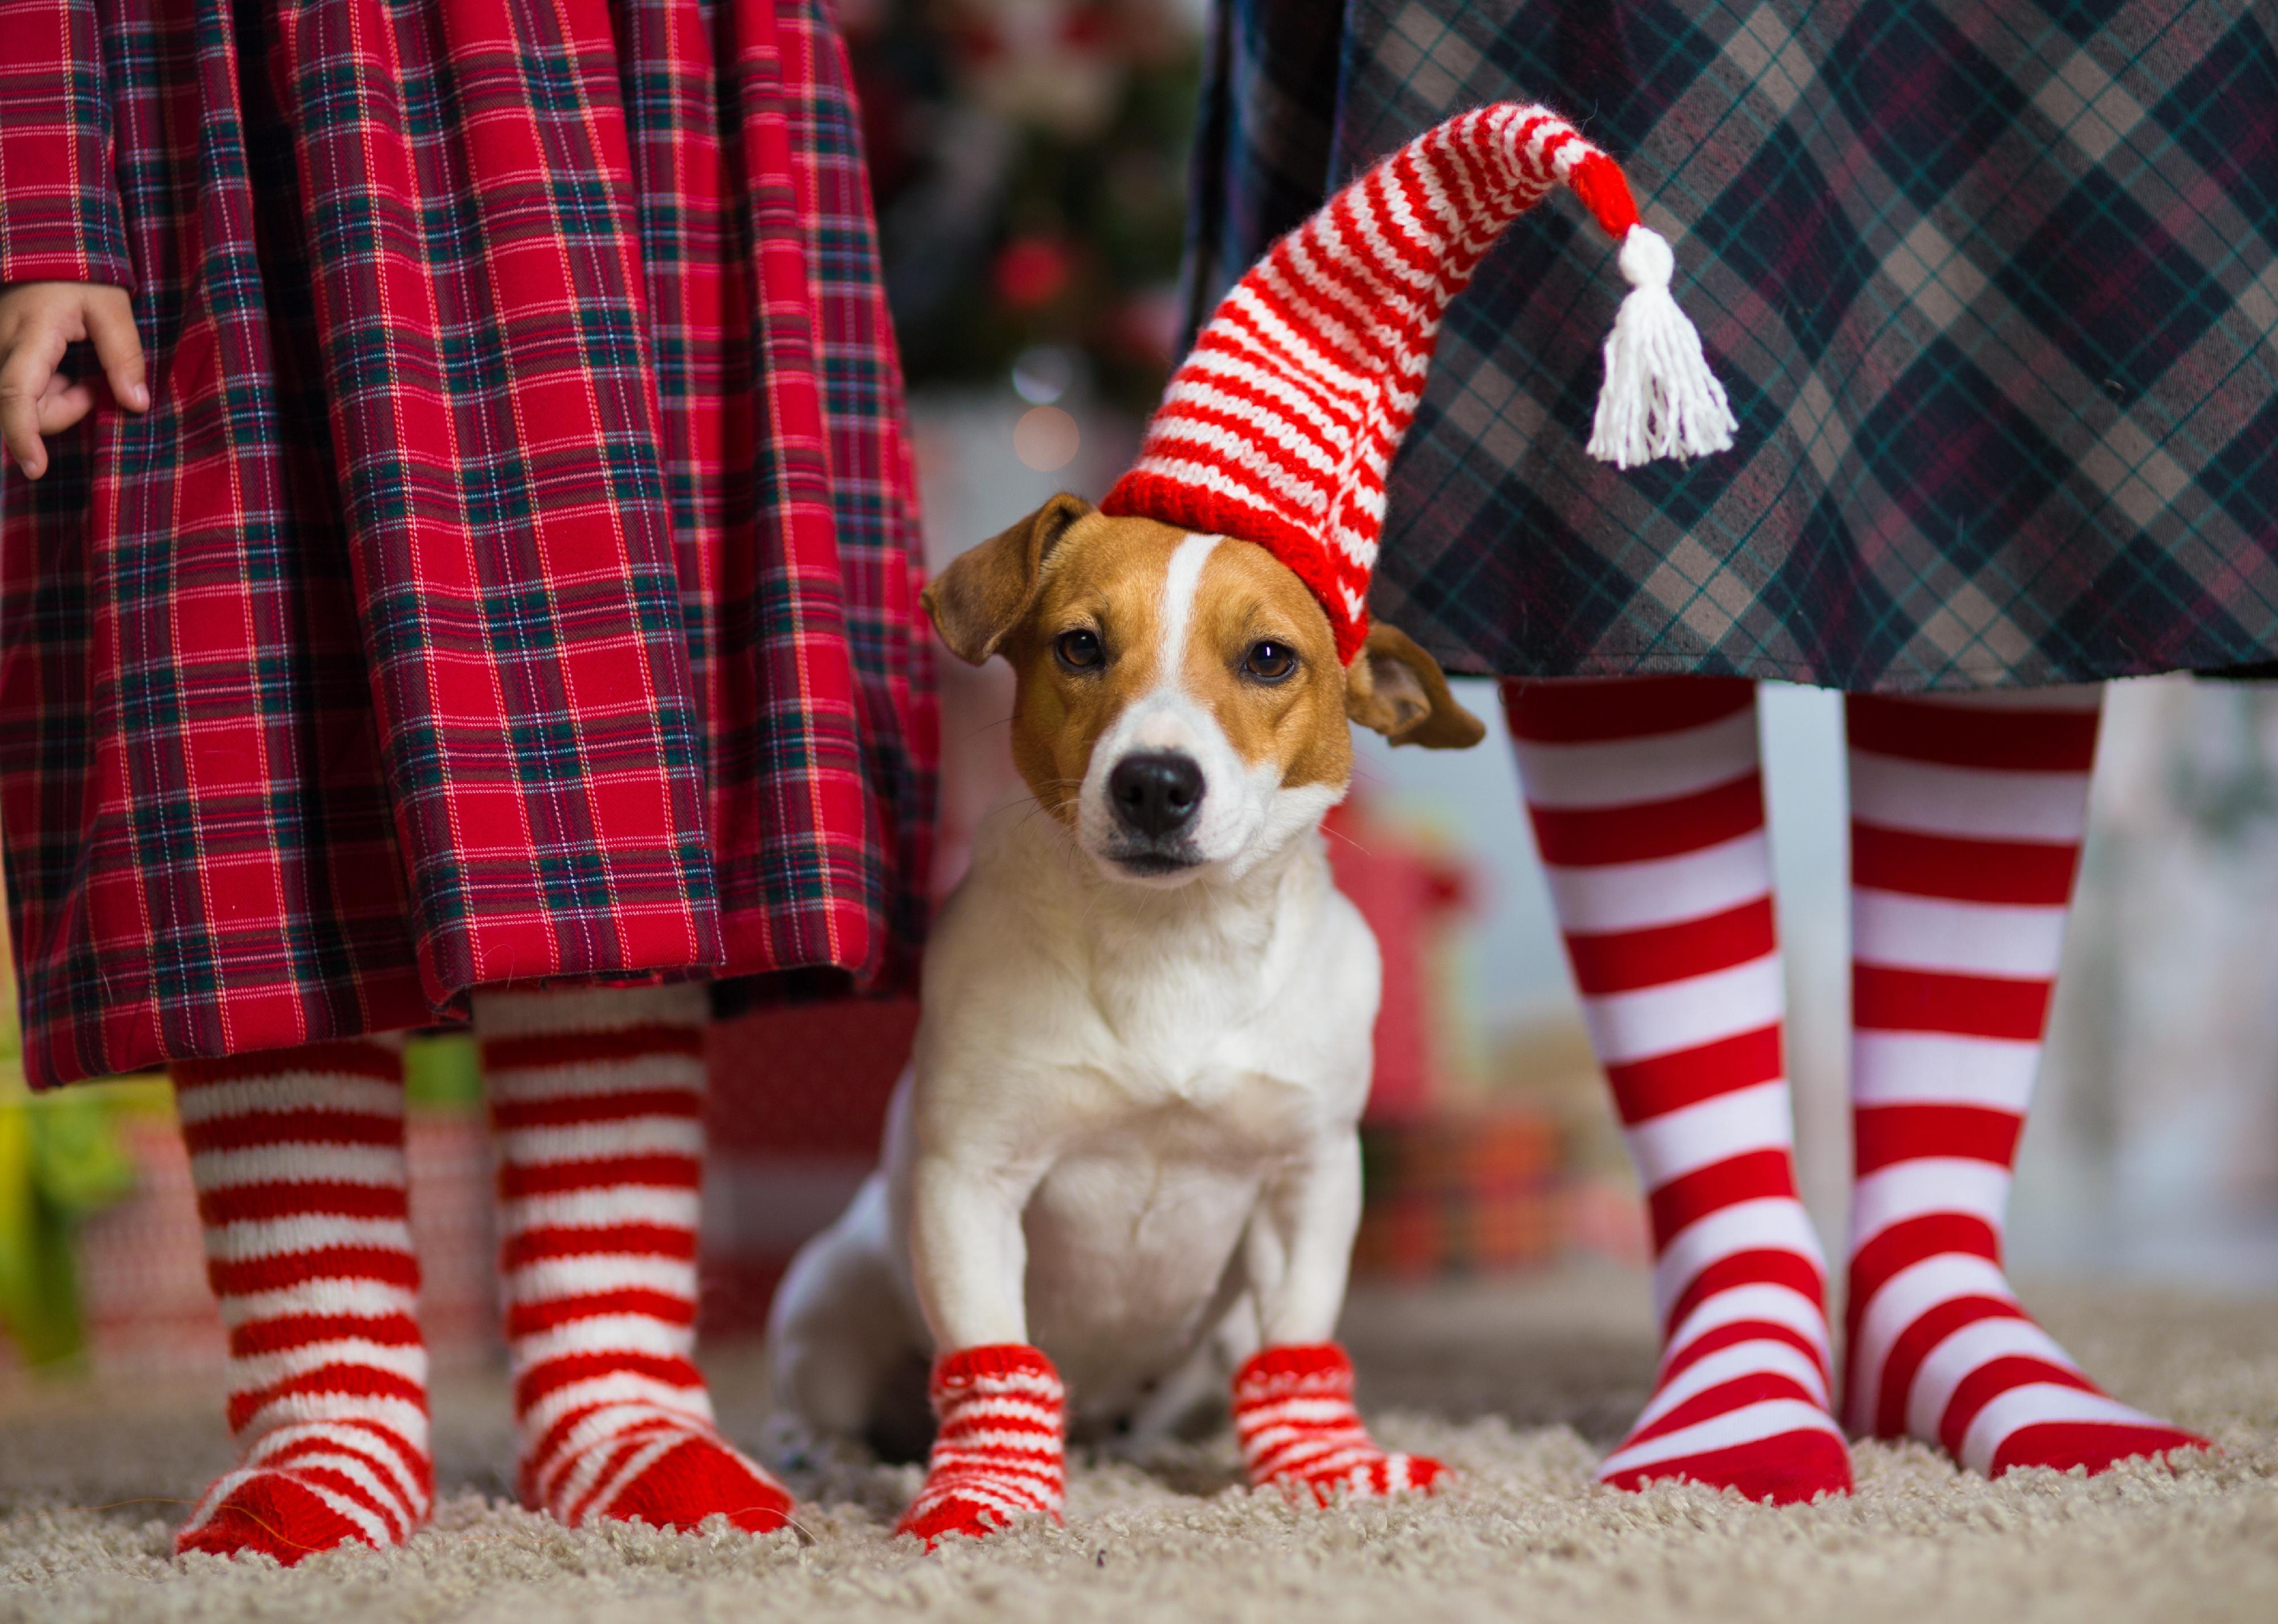 A Jack Russell Terrier in between two kids, all in red and white striped socks.